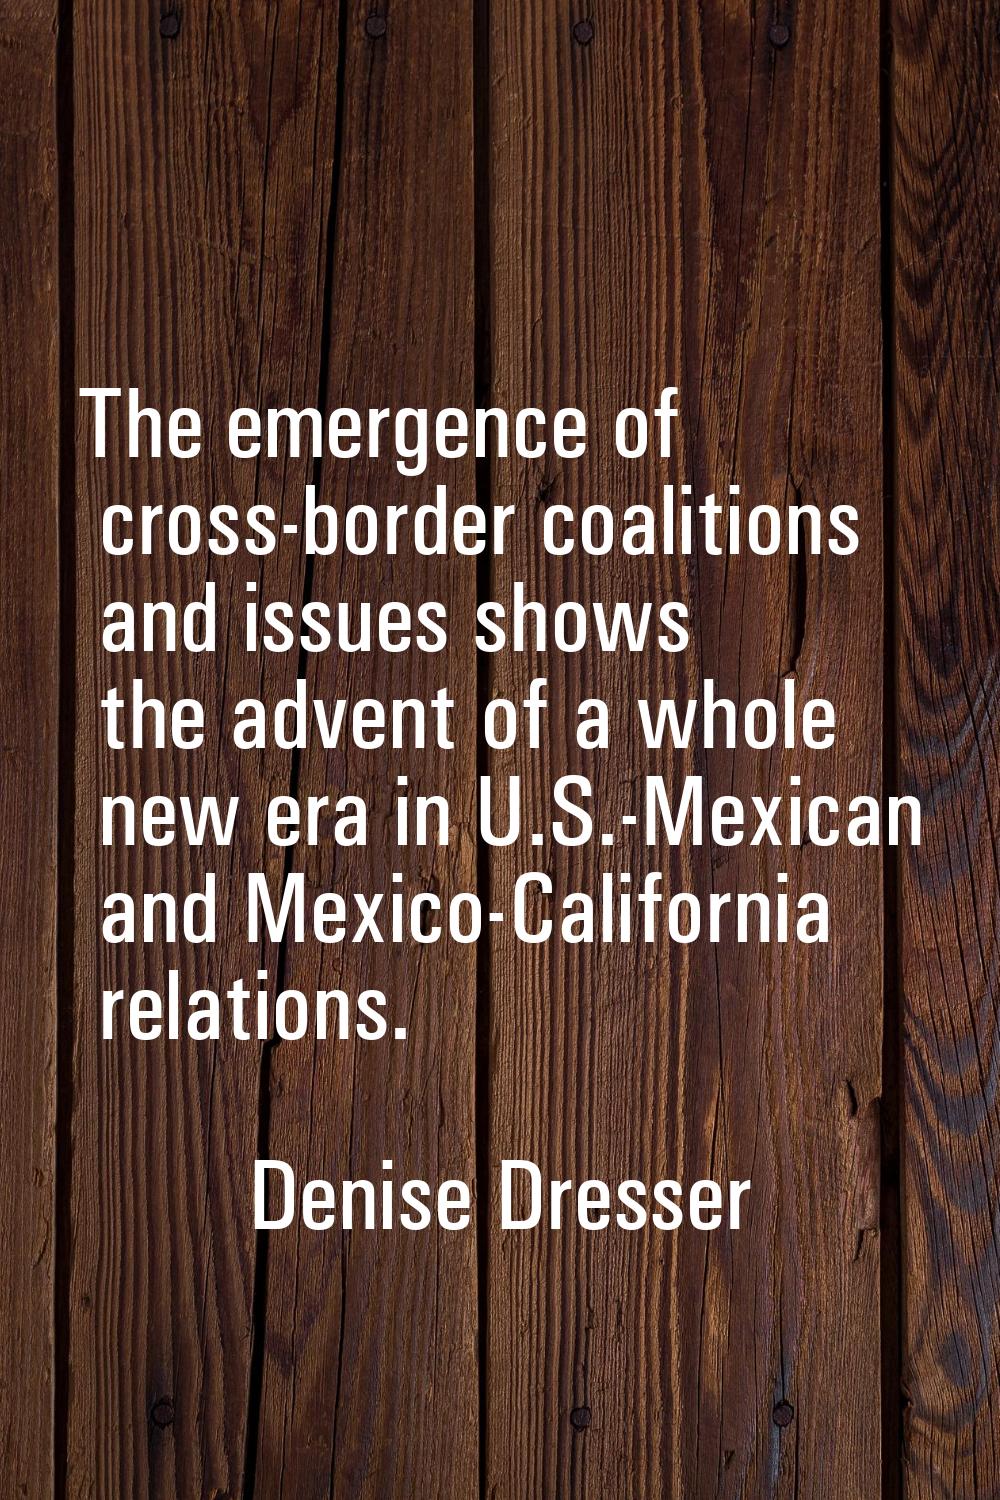 The emergence of cross-border coalitions and issues shows the advent of a whole new era in U.S.-Mex